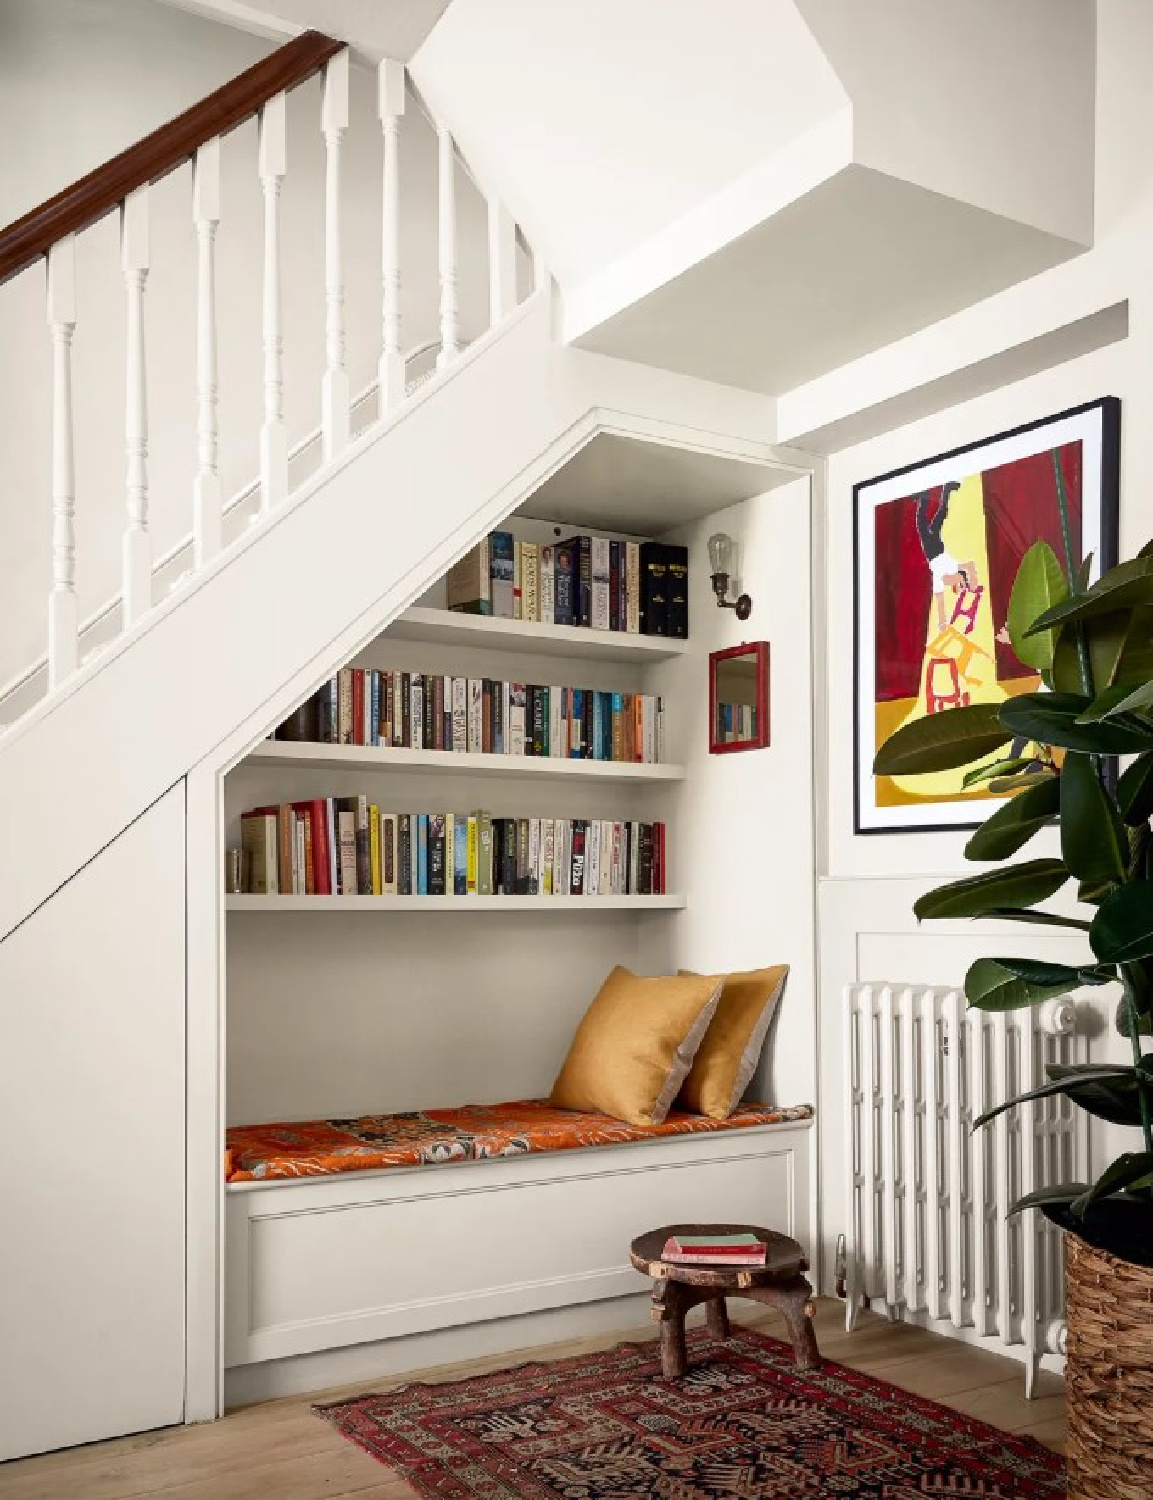 Lonika Chande designed snug reading nook under stairs in a London home (photo Paul Massey for House & Garden UK). #snugrooms #readingnooks